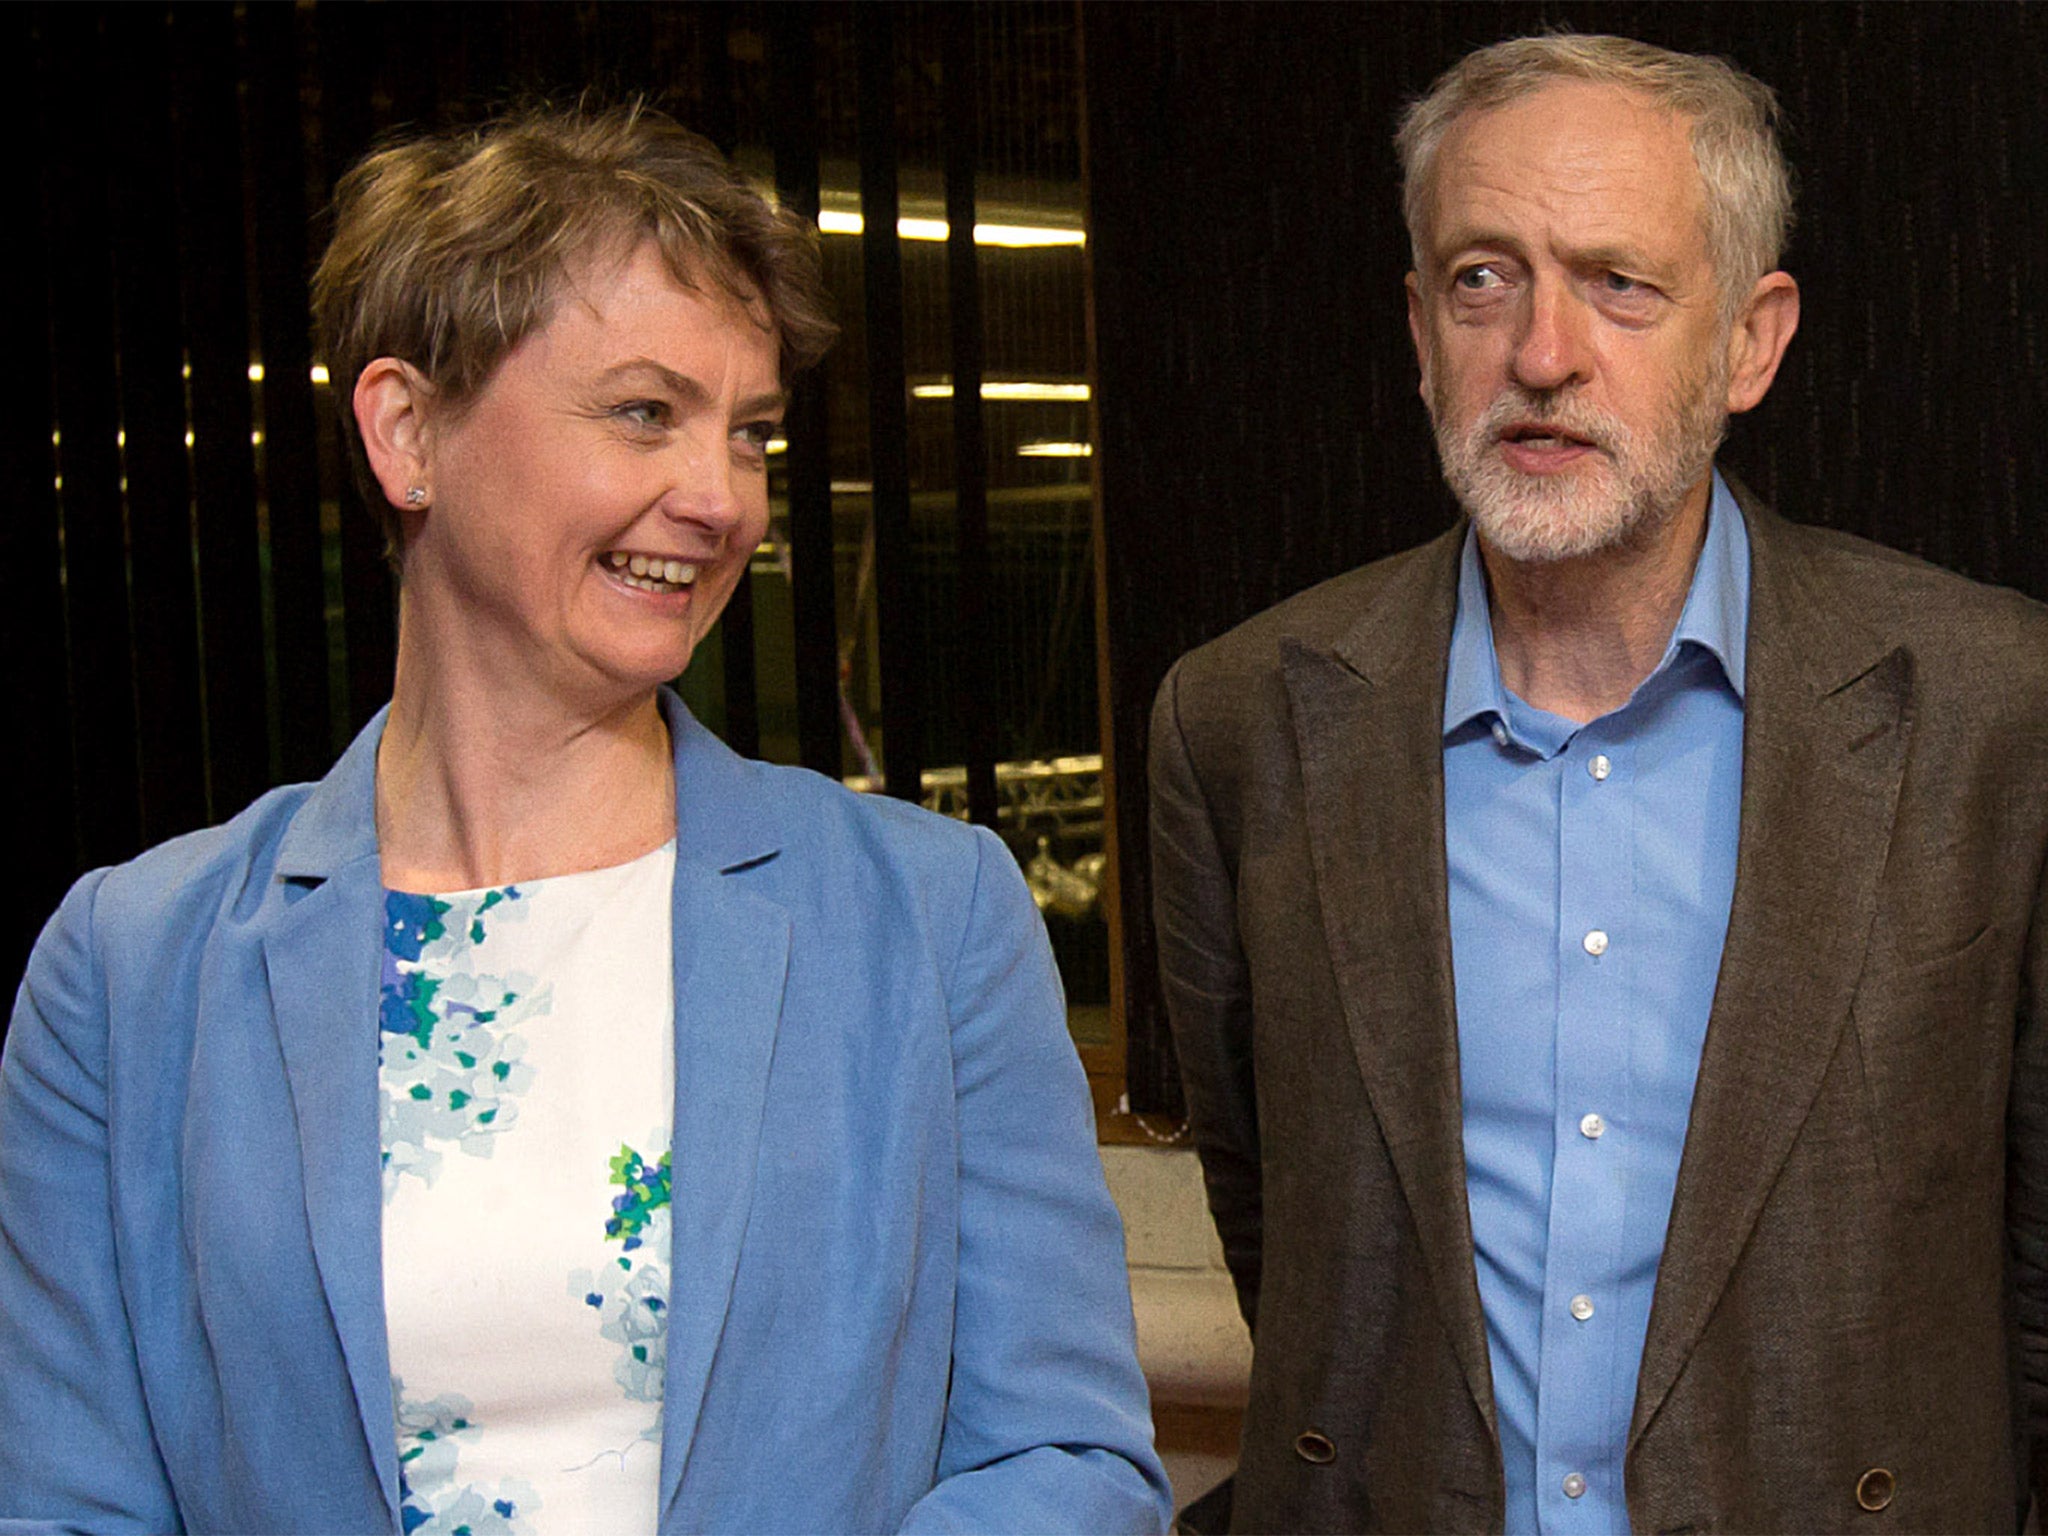 Labour leadership candidates Yvette Cooper and Jeremy Corbyn in Stevenage on Tuesday